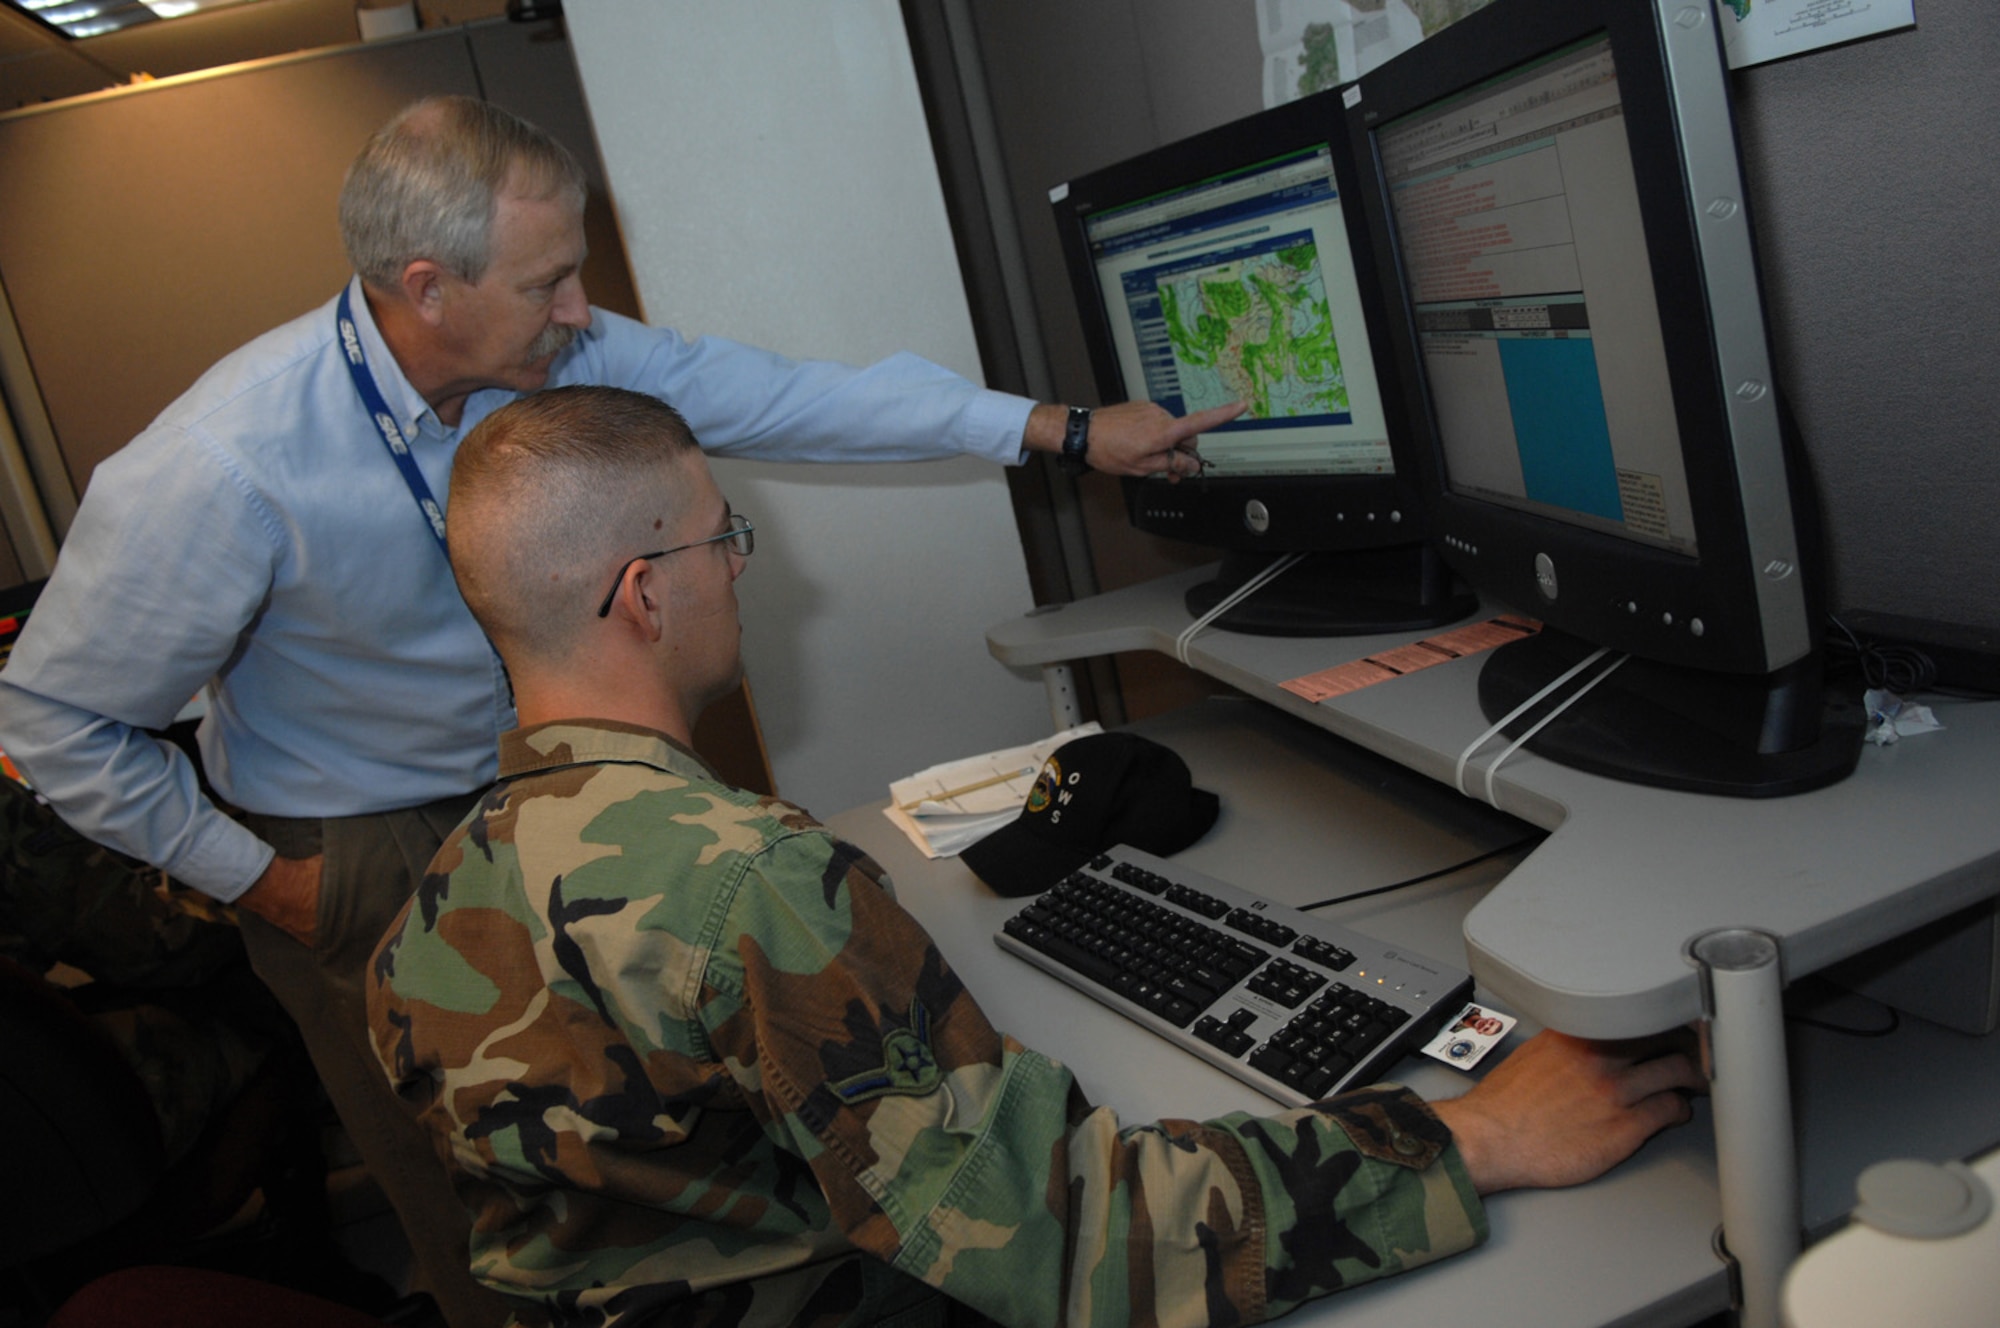 Tim Smith, left, instructs Airman William Mingey on the proper procedures for forecasting interpreting graphic output or precipitation from computer weather modules.  All newly assigned Airmen receive extensive training to prepare them for the unique forecast challenges throughout the western United States.  Mr. Smith and Airman Mingey are members of the 25th Operational Weather Squadron.  (U.S. Air Force photo by Senior Airman Alesia Goosic)